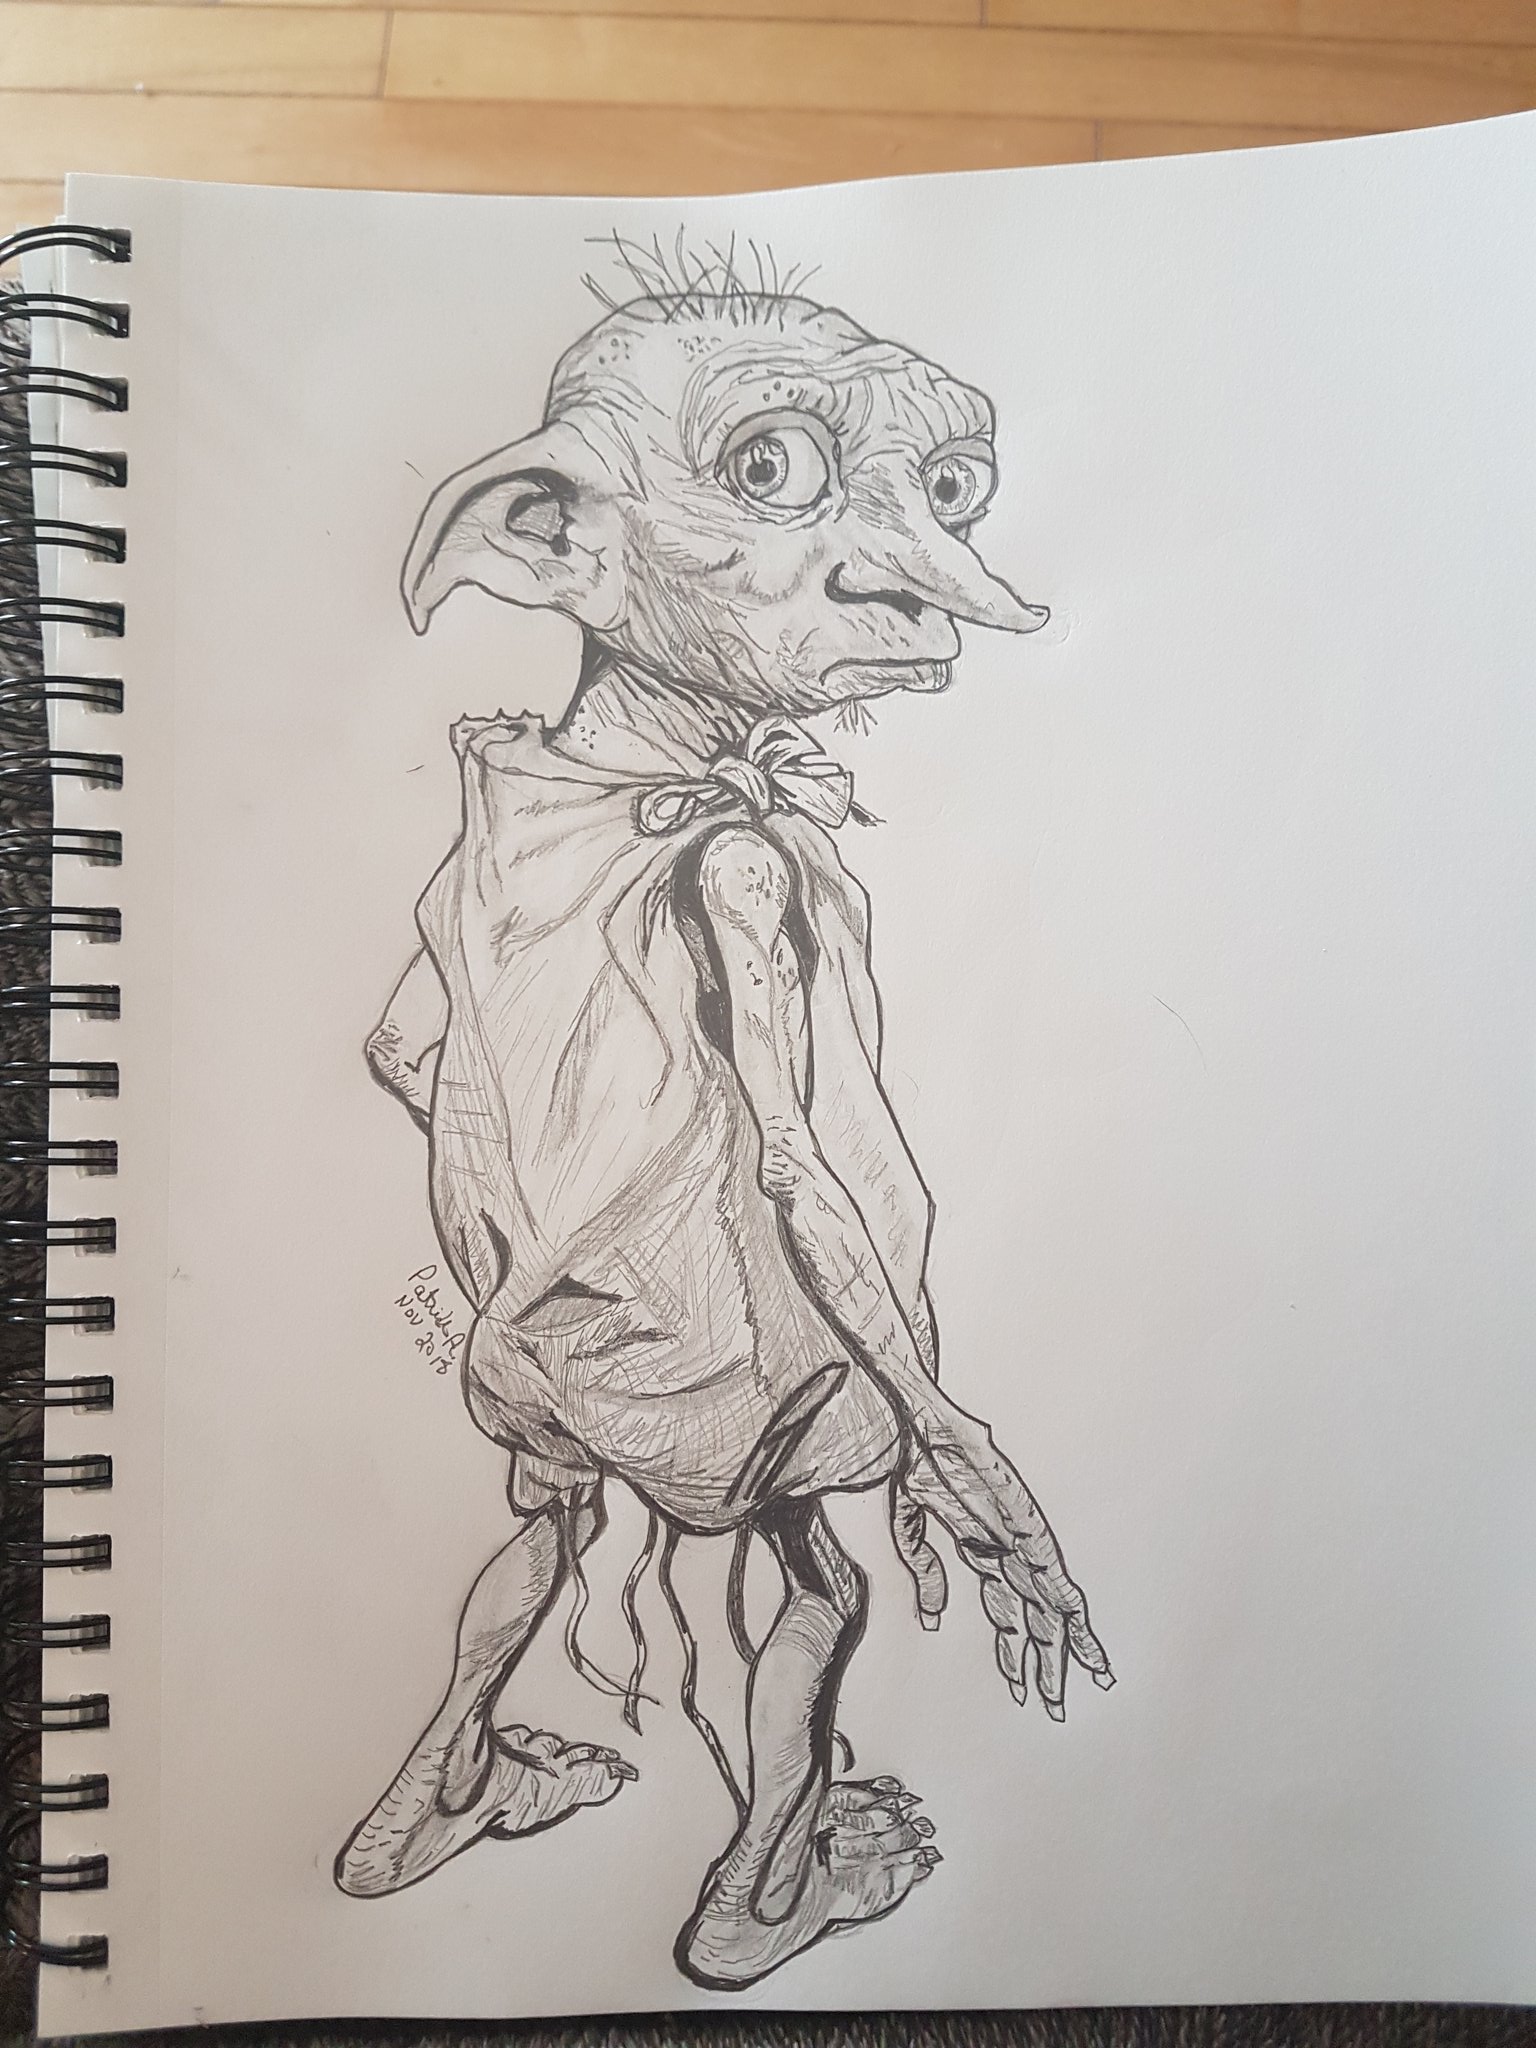 Pat S Drawings On Twitter Dobby Bellofy Art Rt D Artiste Arthelp Esp Theartisthelp Yoarteapp Conoceartistas Art Drawing Harrypotter Drawings Pencil Https T Co Vf5ukzoafn It's the most simple method possible, and also the most basic one. drawing harrypotter drawings pencil